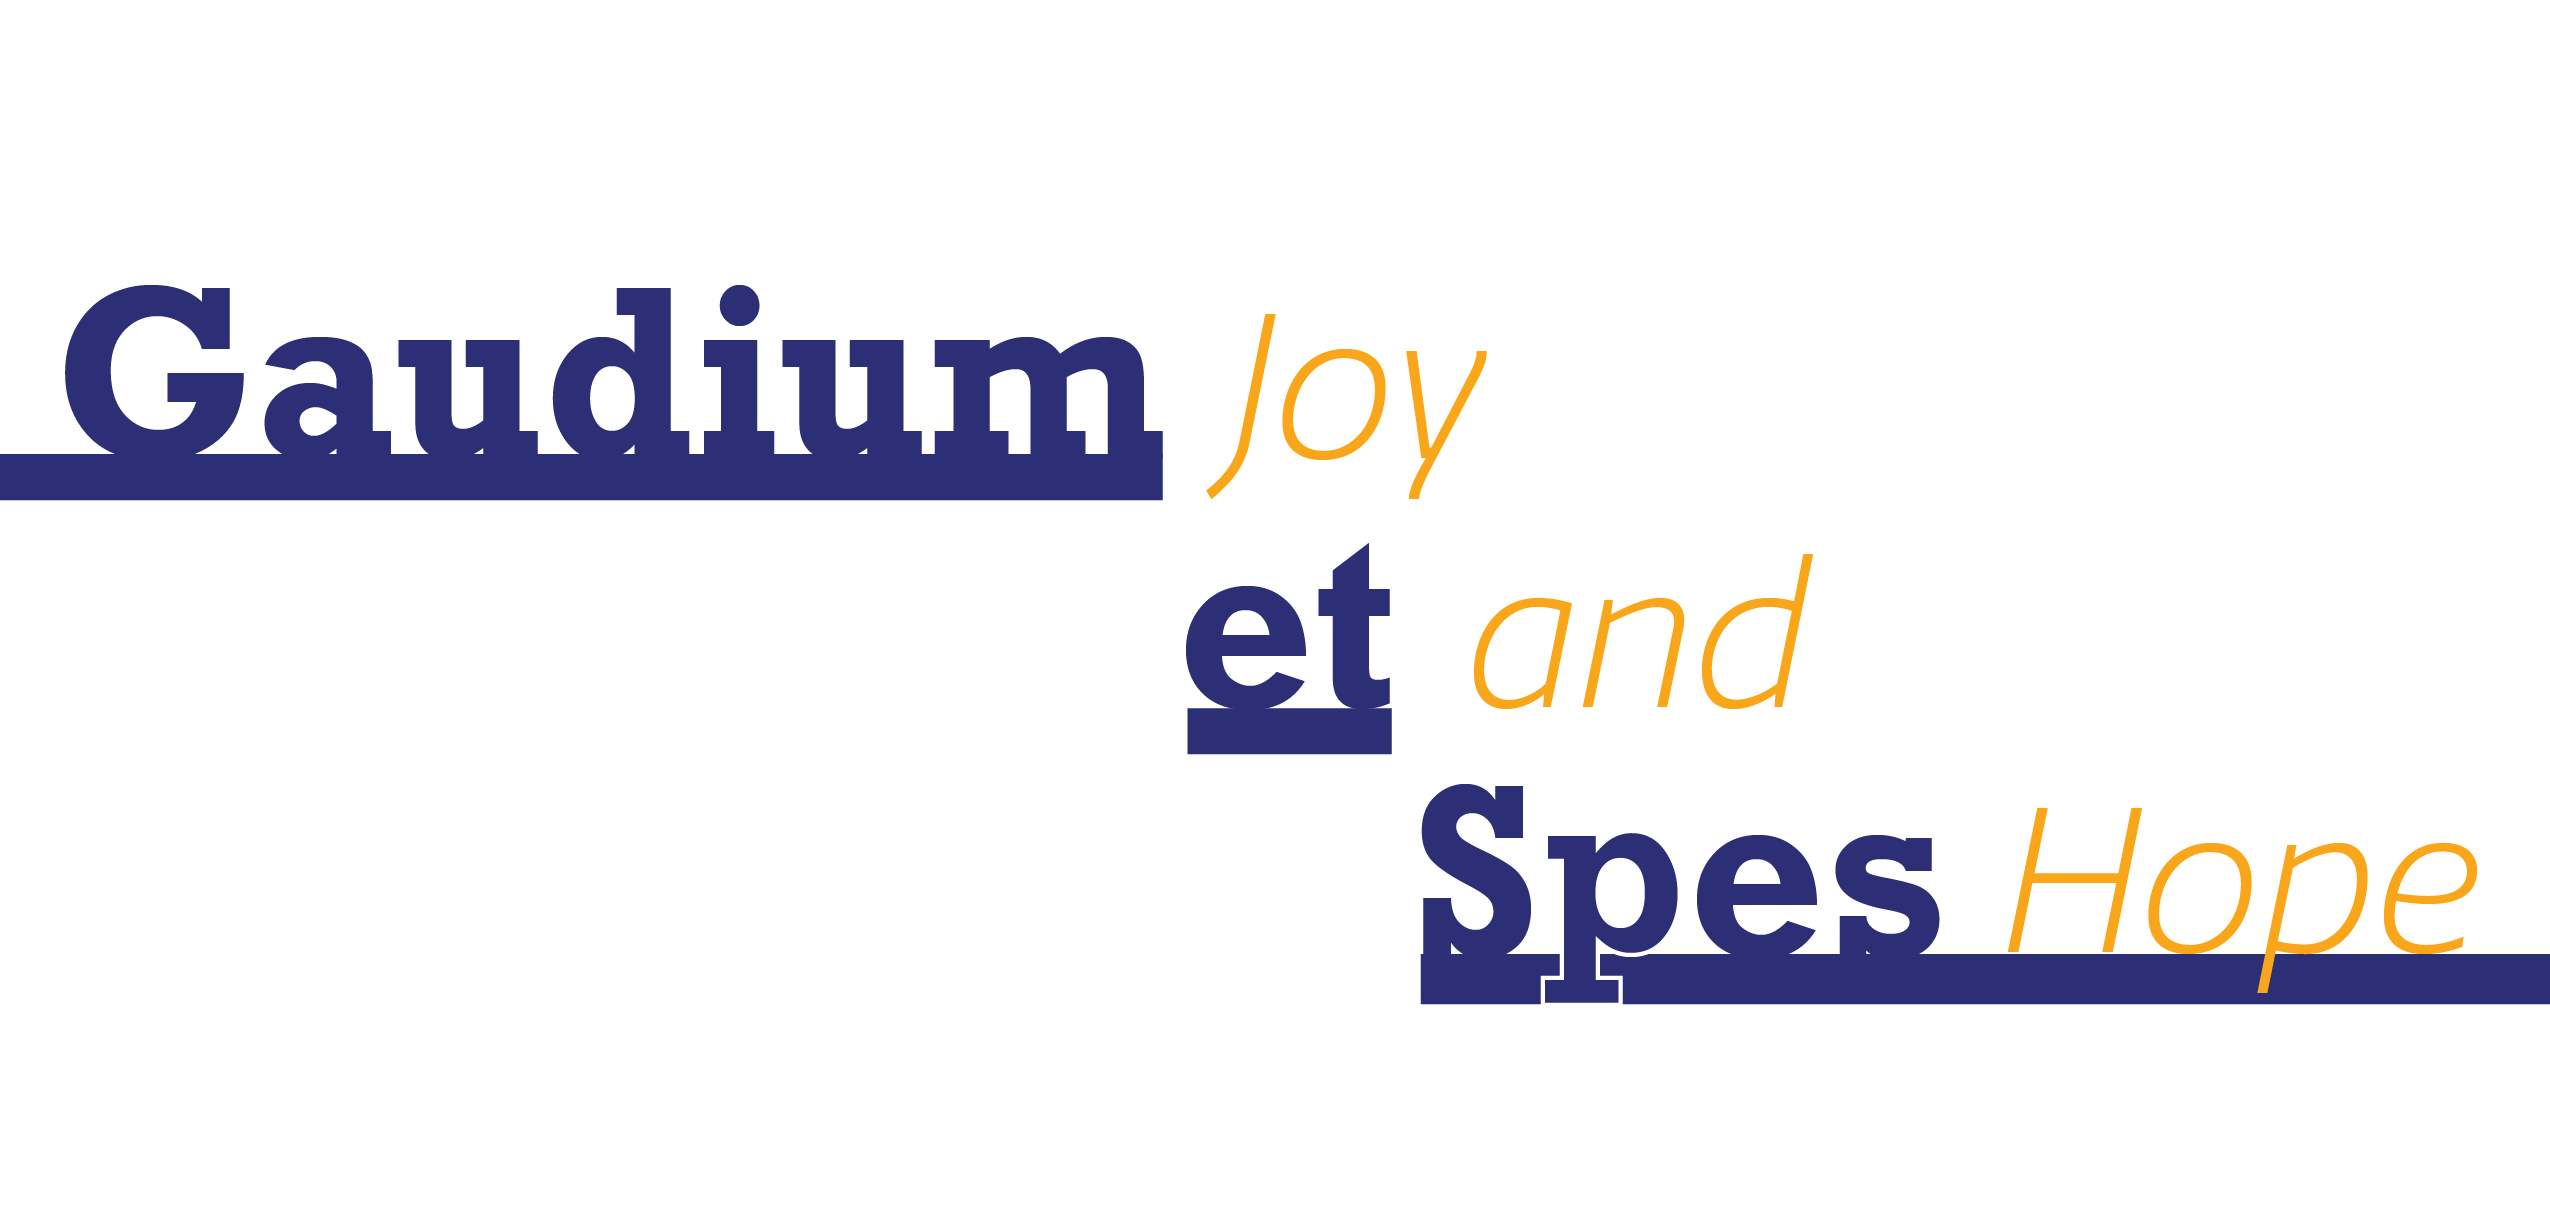 Joy and Hope in Gaudium et spes - The Georgetown Voice